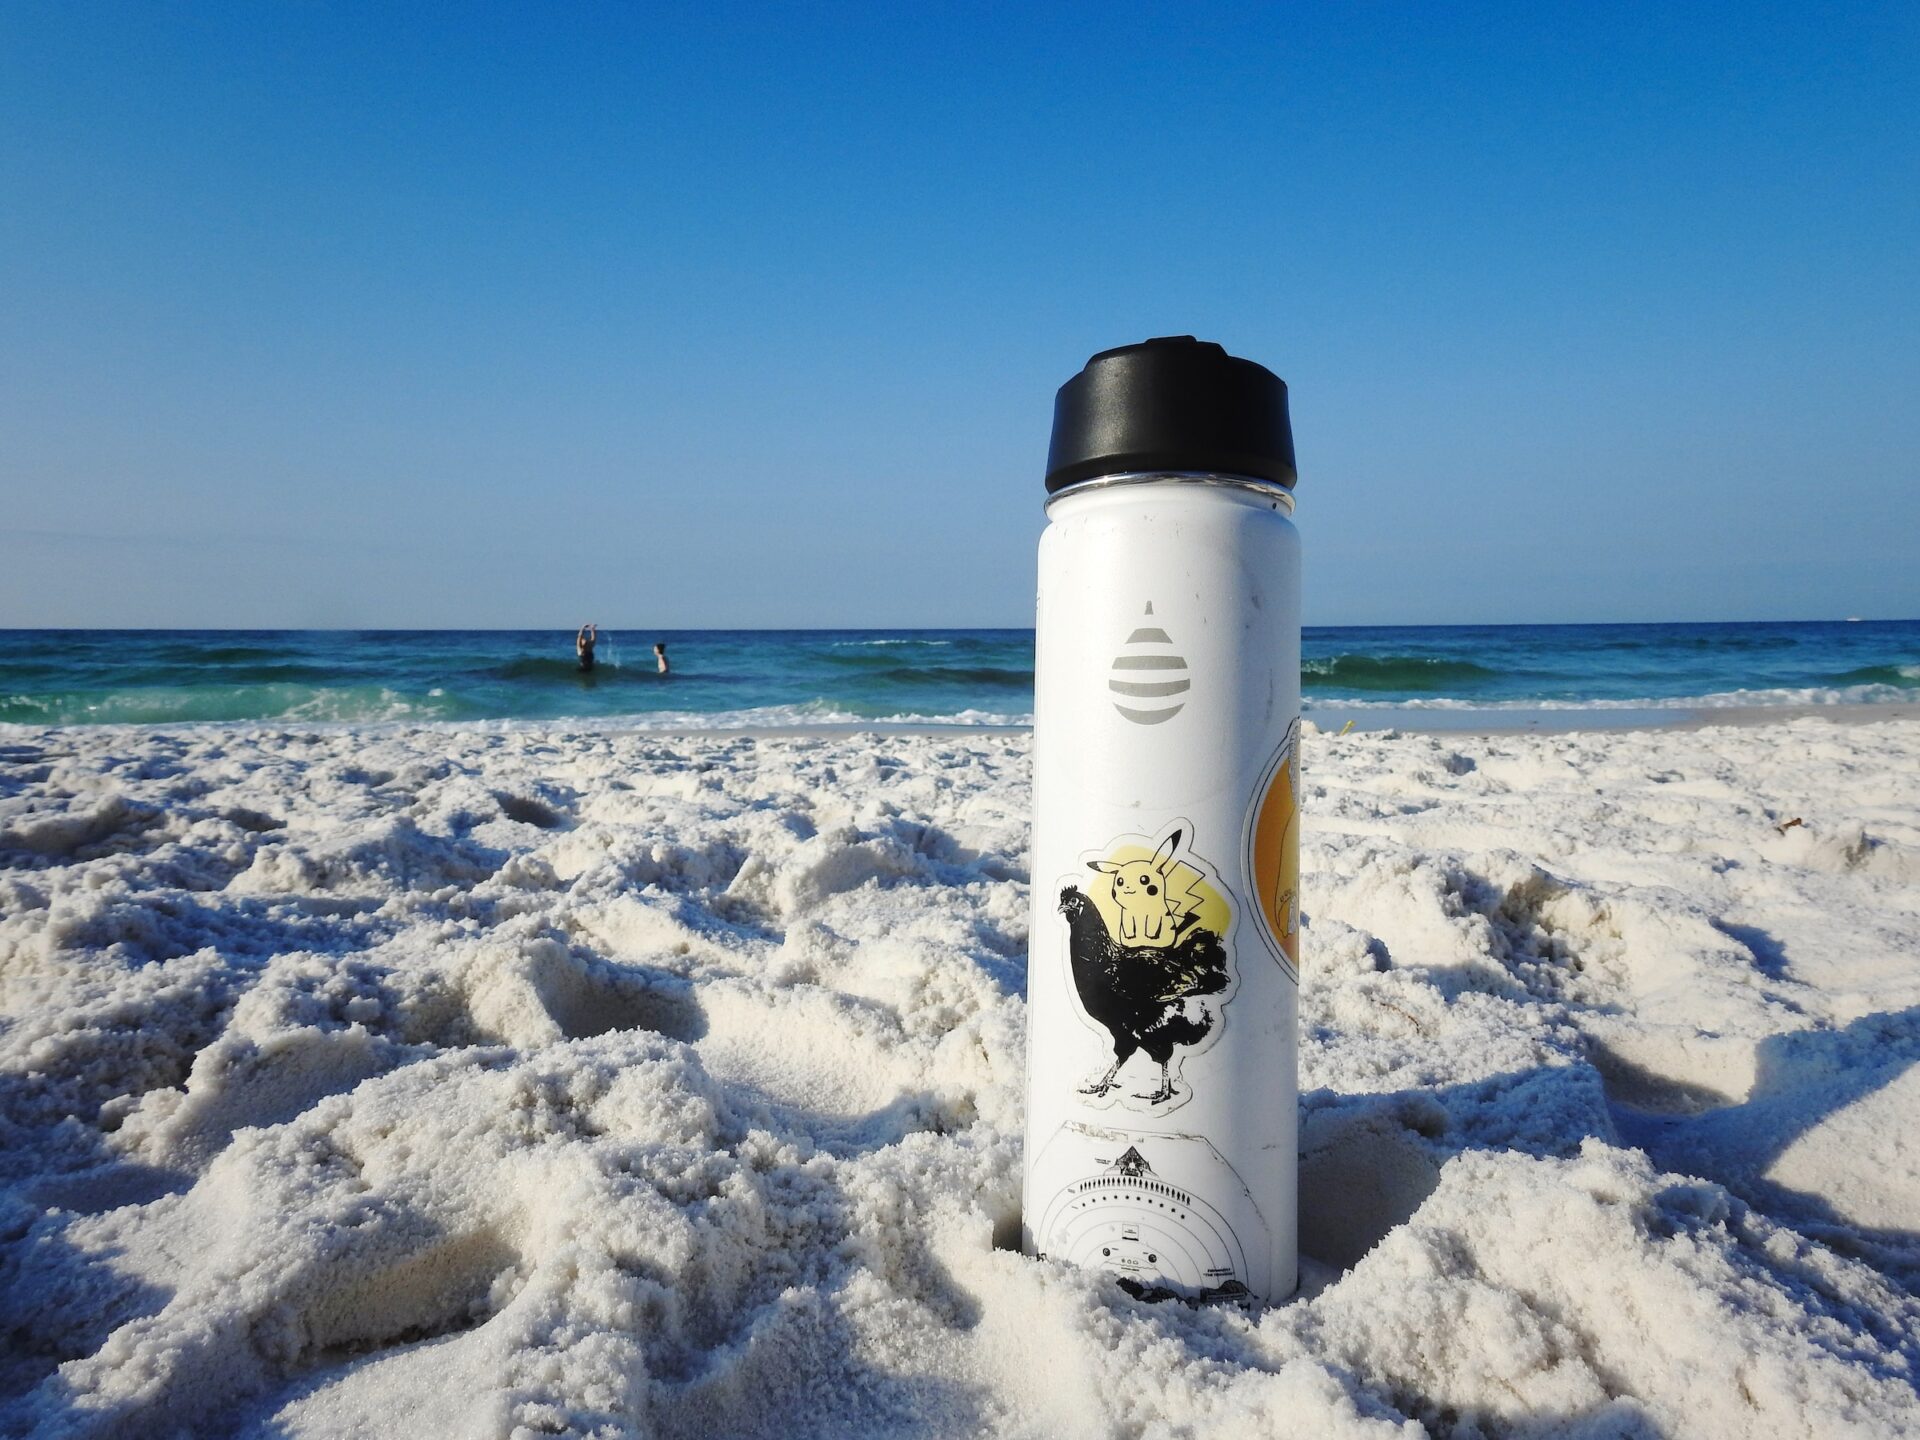 A reusable water bottle with some stickers on it stands alone in the sand on a beach.The sand is pale and you can see the ocean just beyond it.